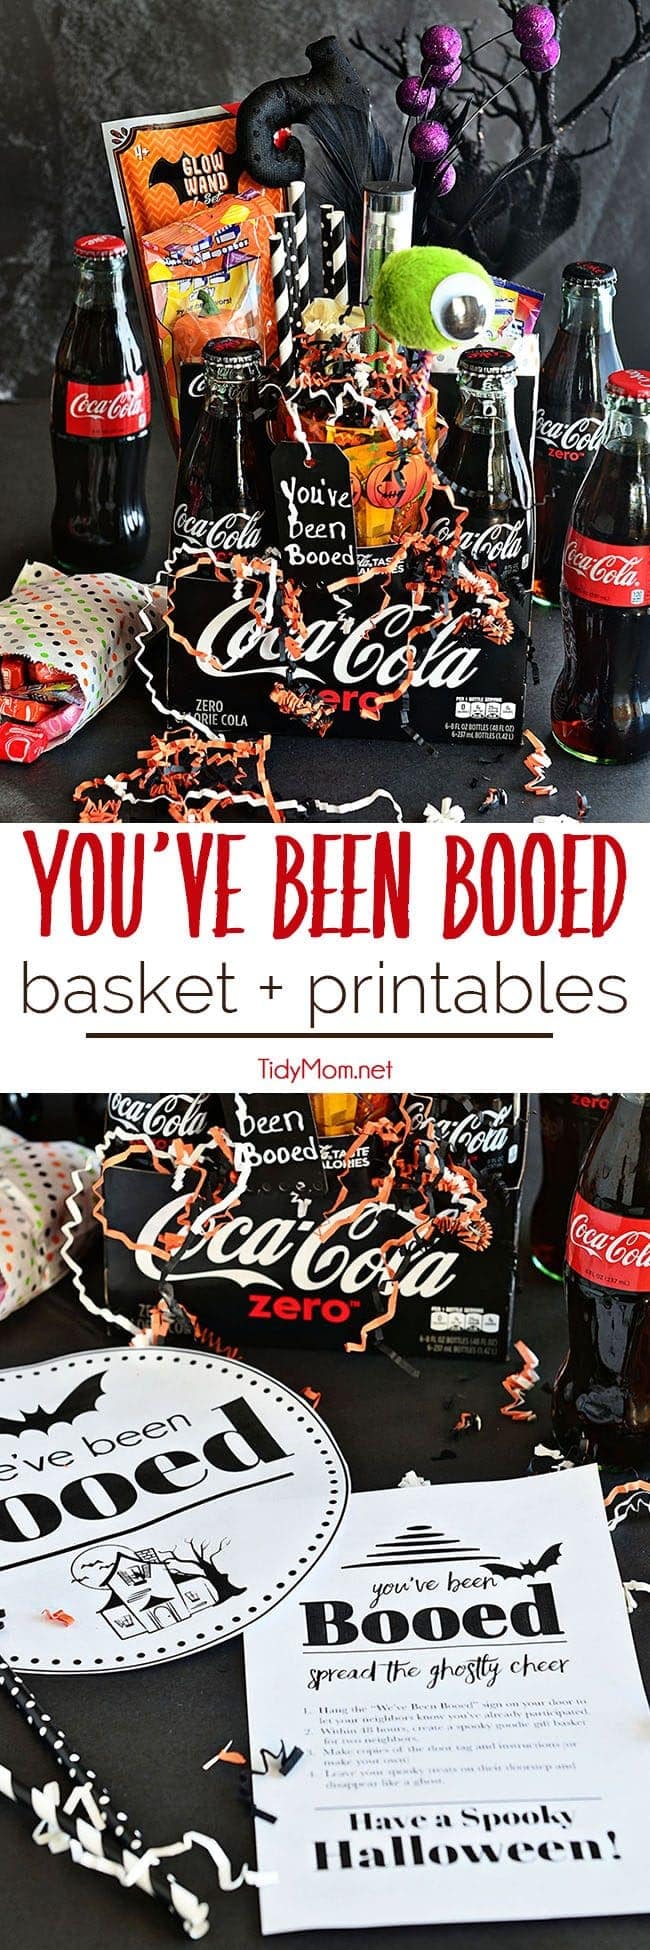 Have fun with your neighbors – You’ve Been BOOed!  This Halloween surprise is fun way to create excitement and smiles around your neighborhood.You’ve Been Booed free printables for Halloween Boo Basket at TidyMom.net